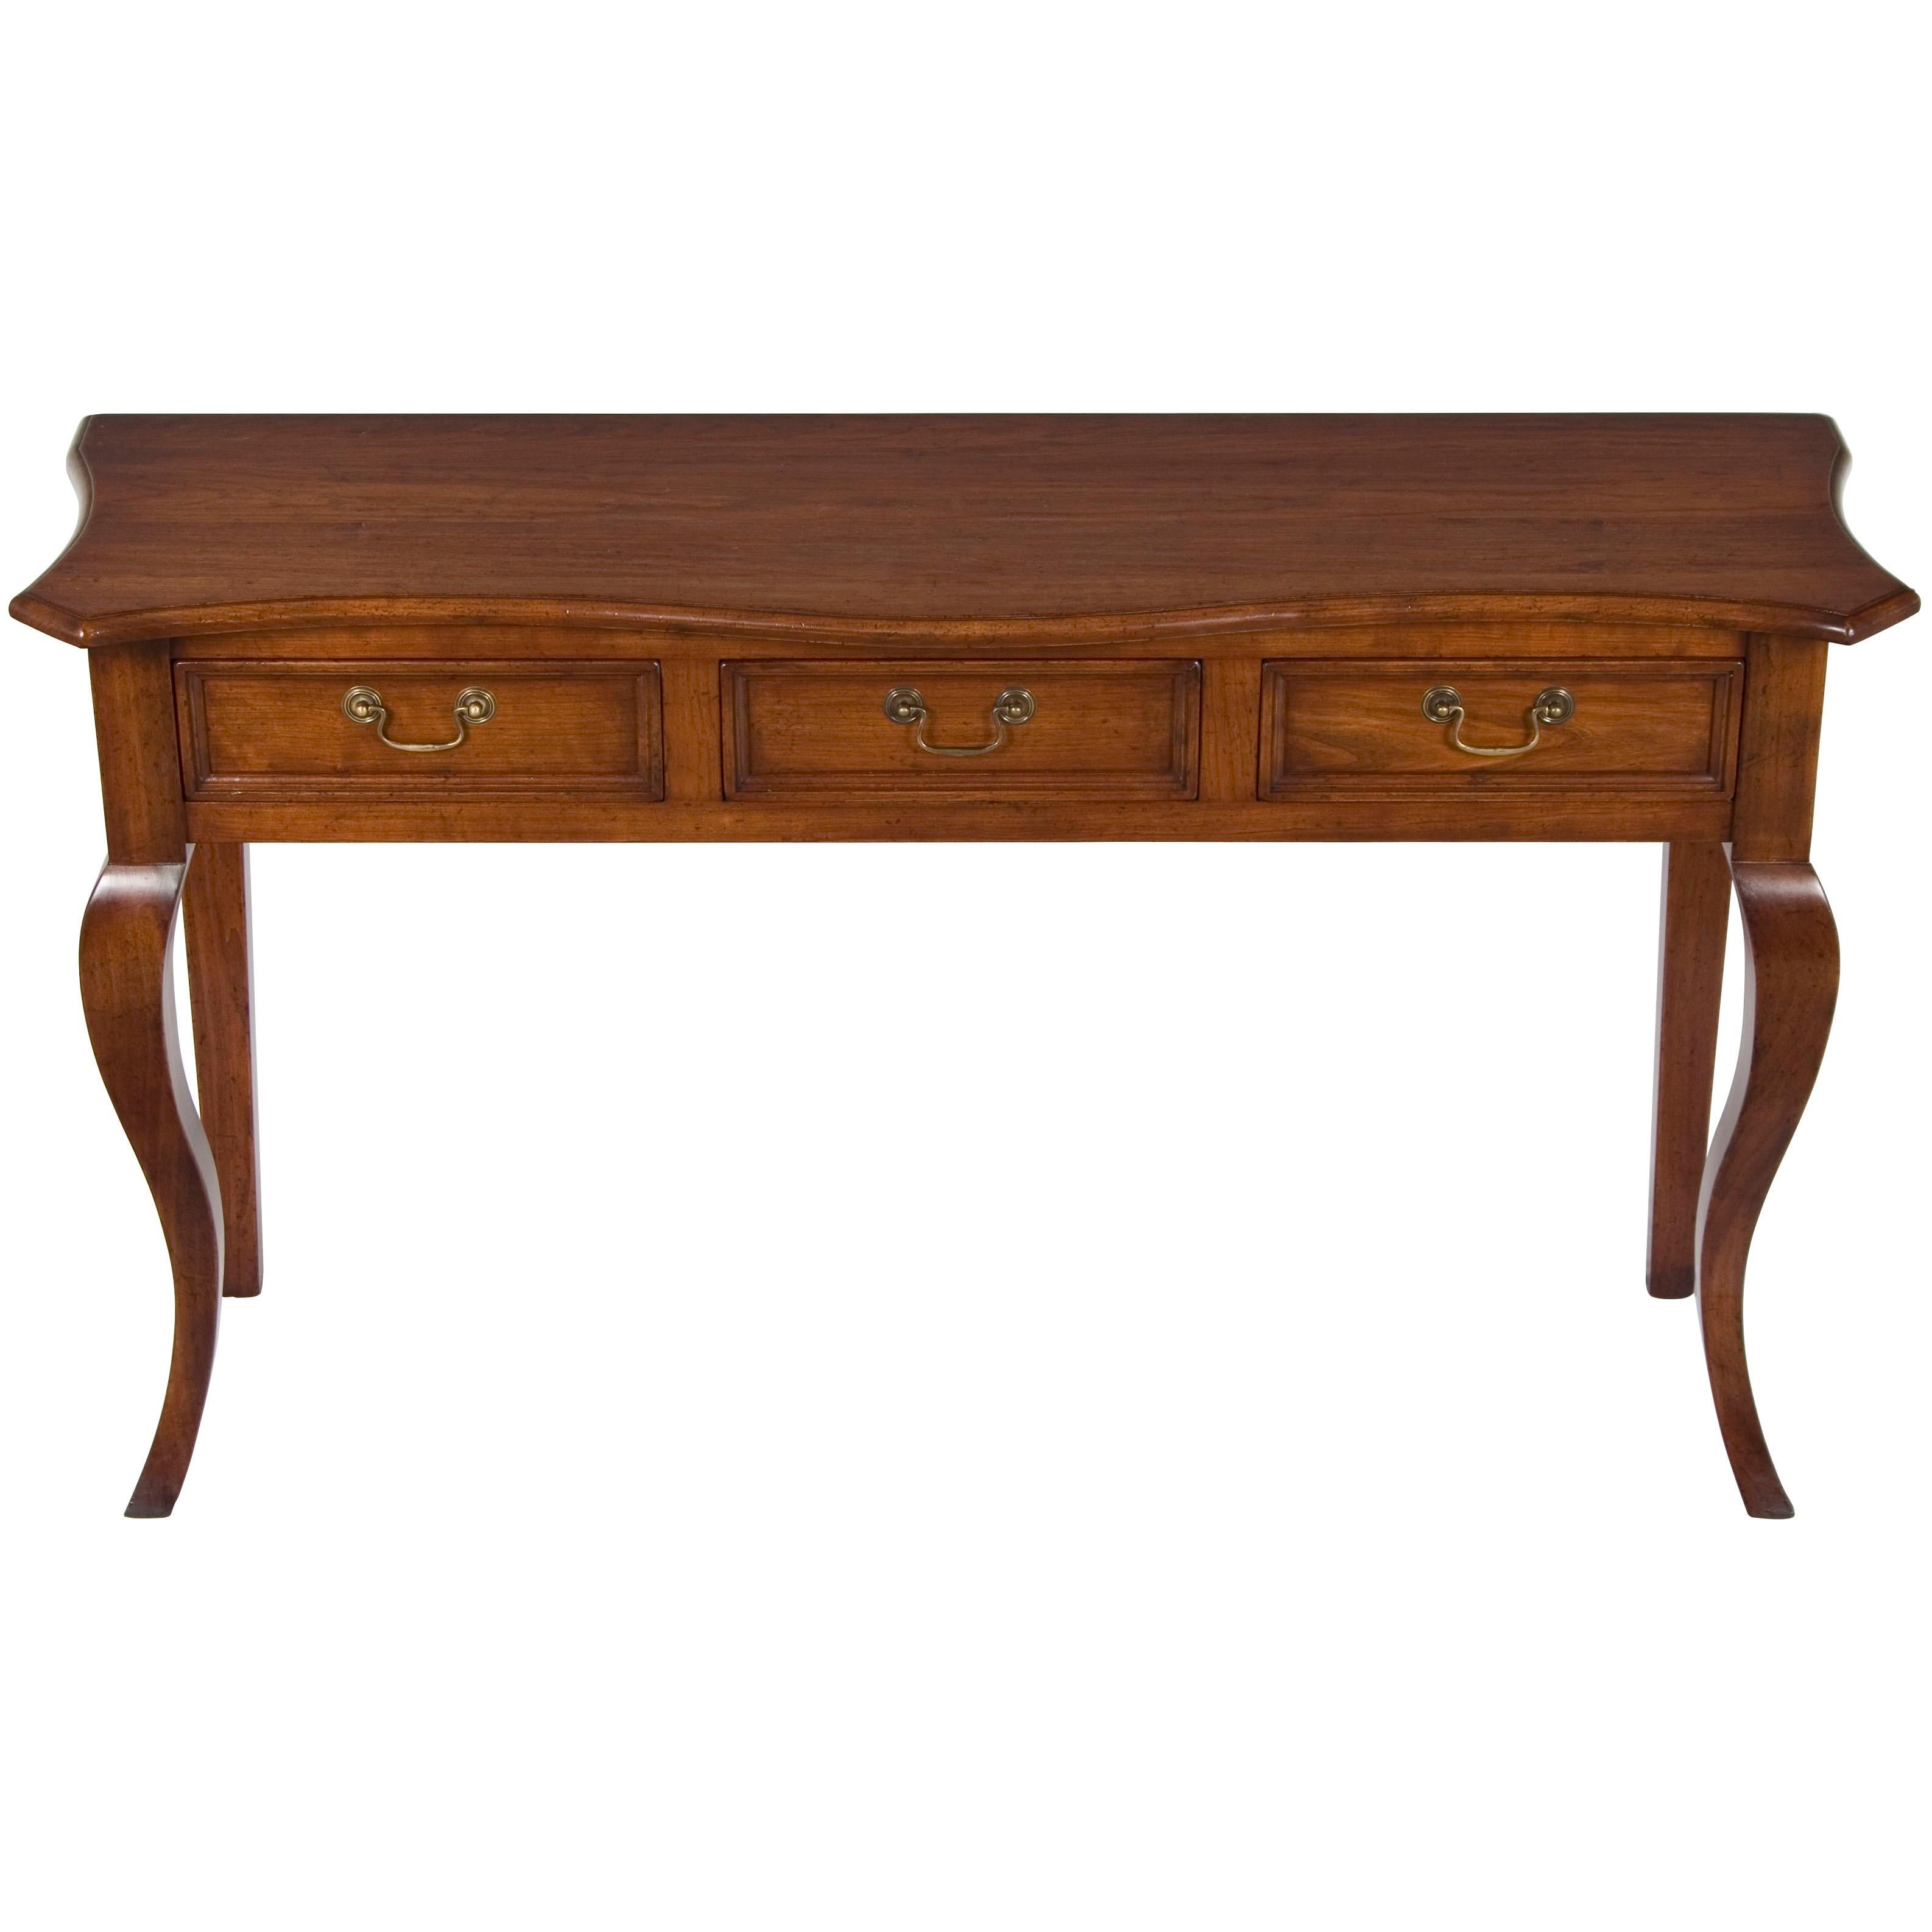 English Cherry French Leg Sideboard Sofa Table For Sale